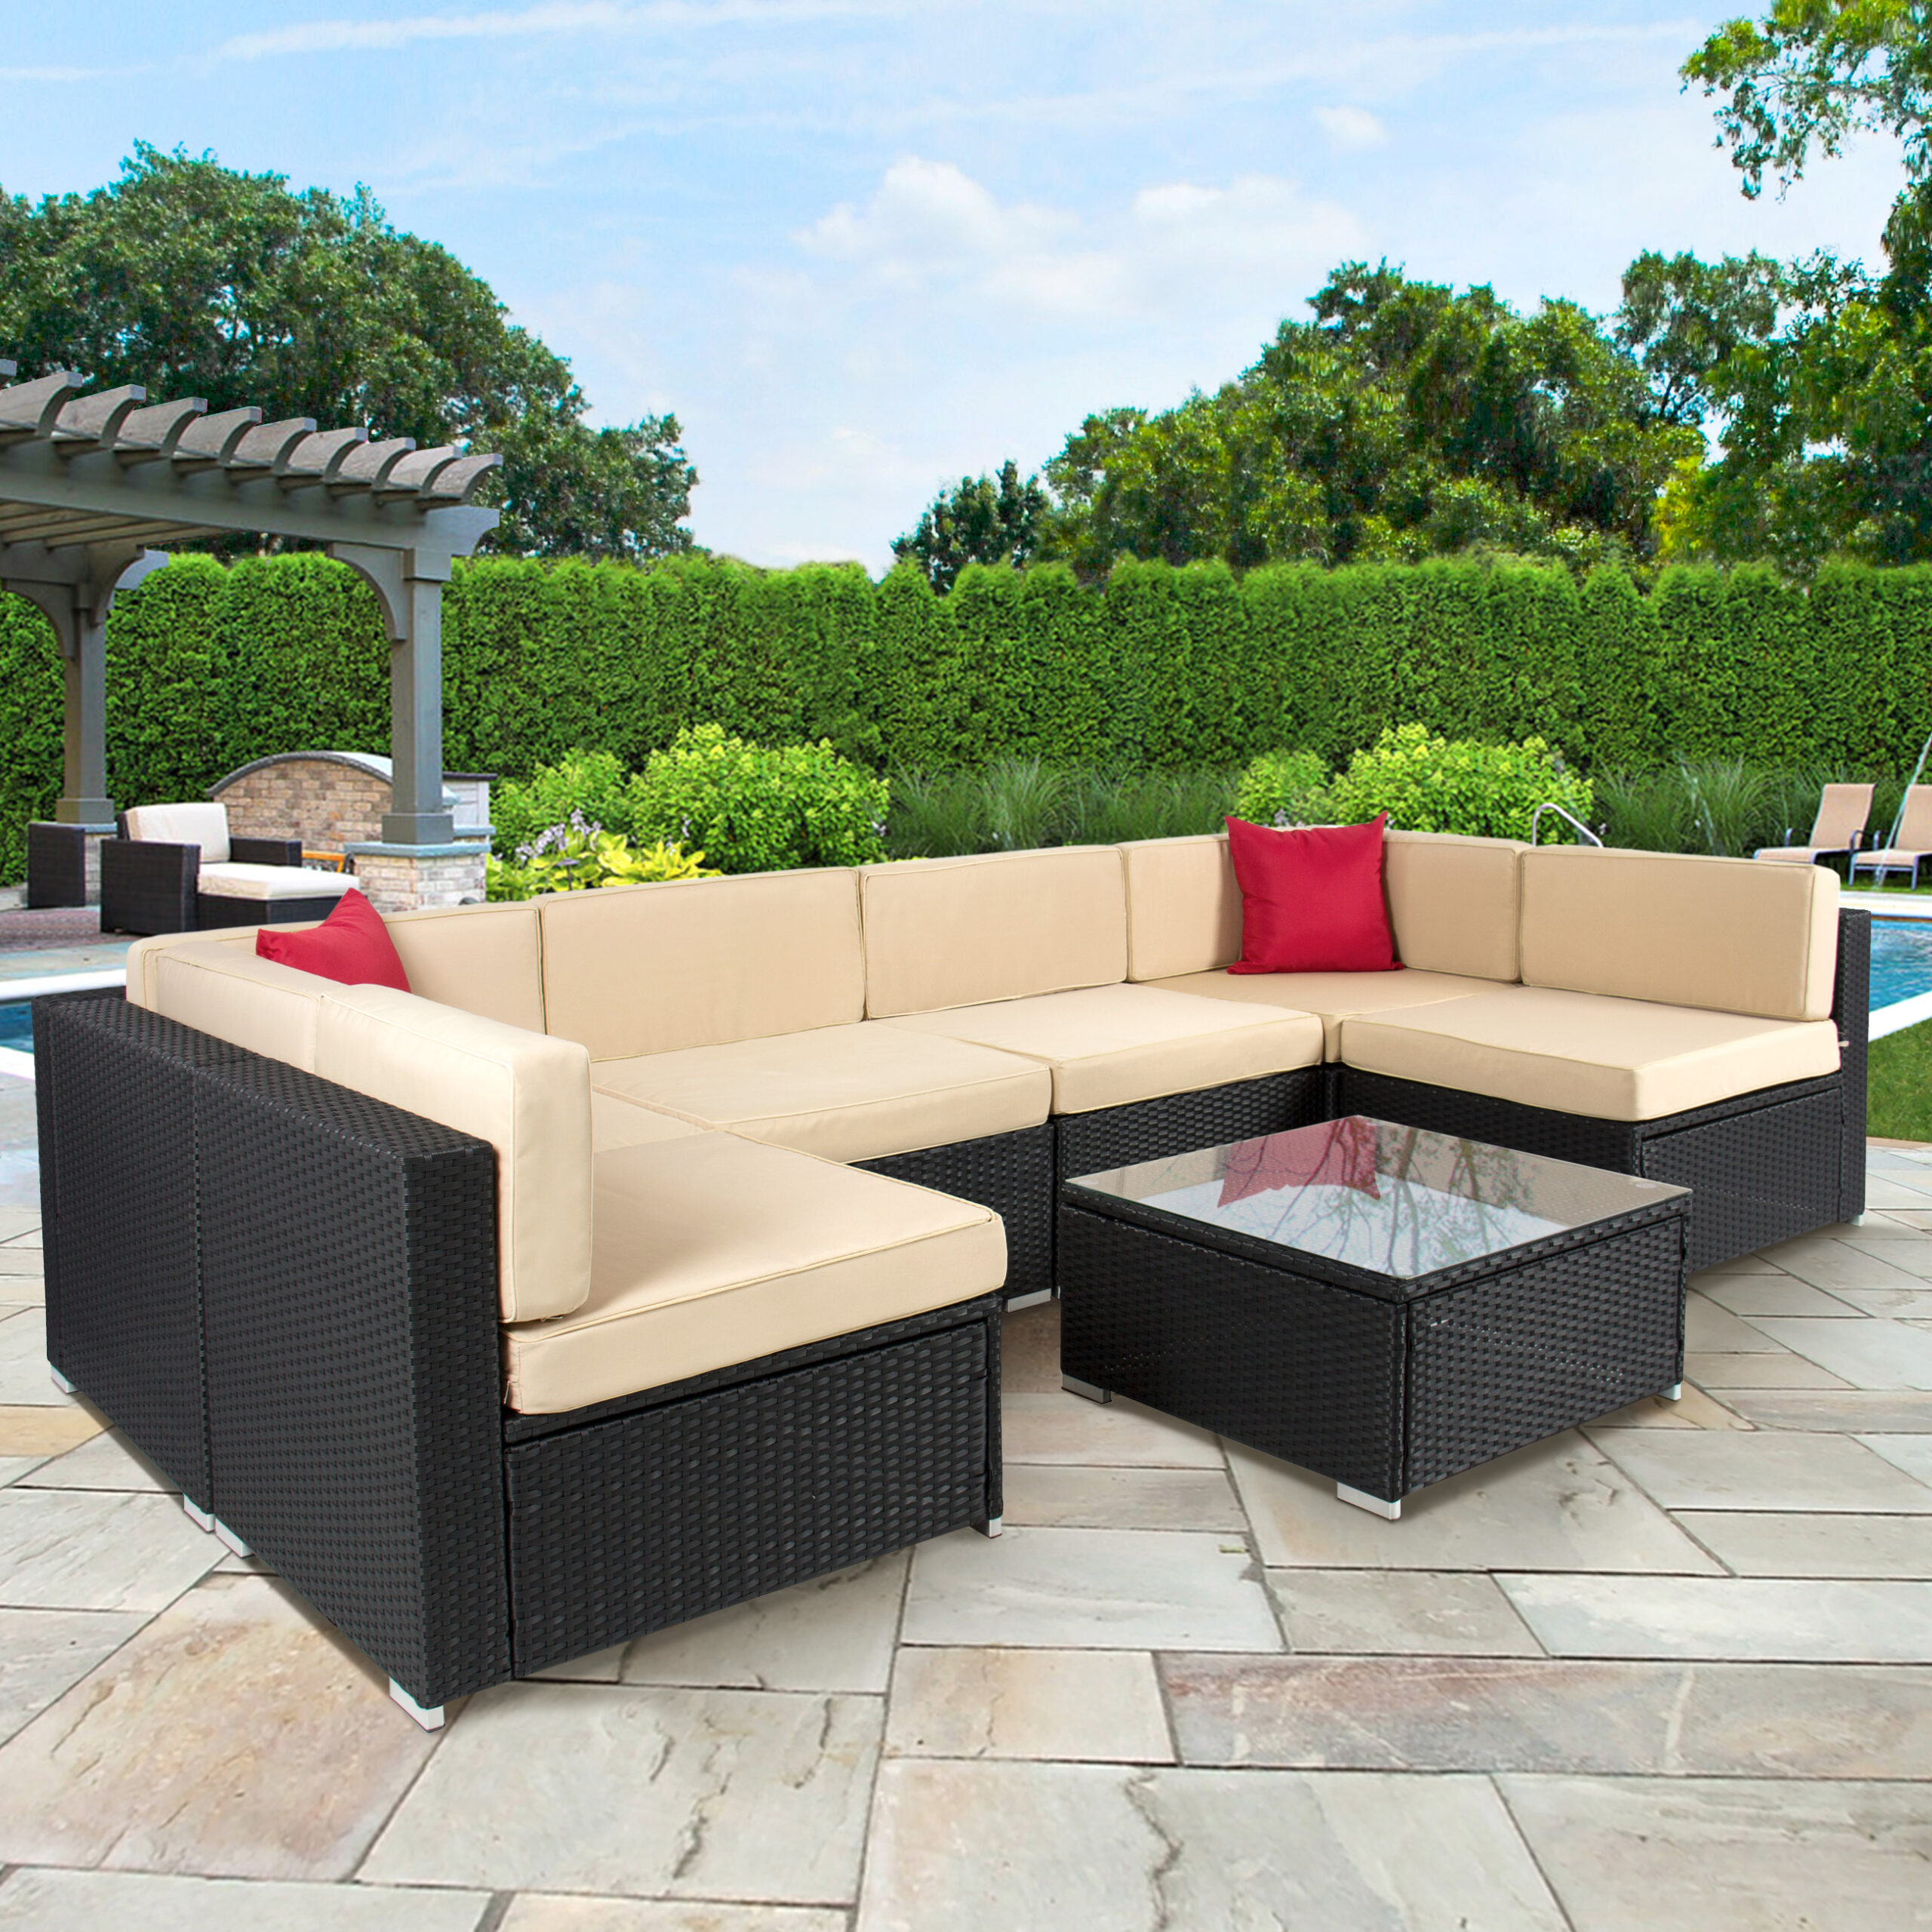 Use rattan sofa sets to brighten your
  area